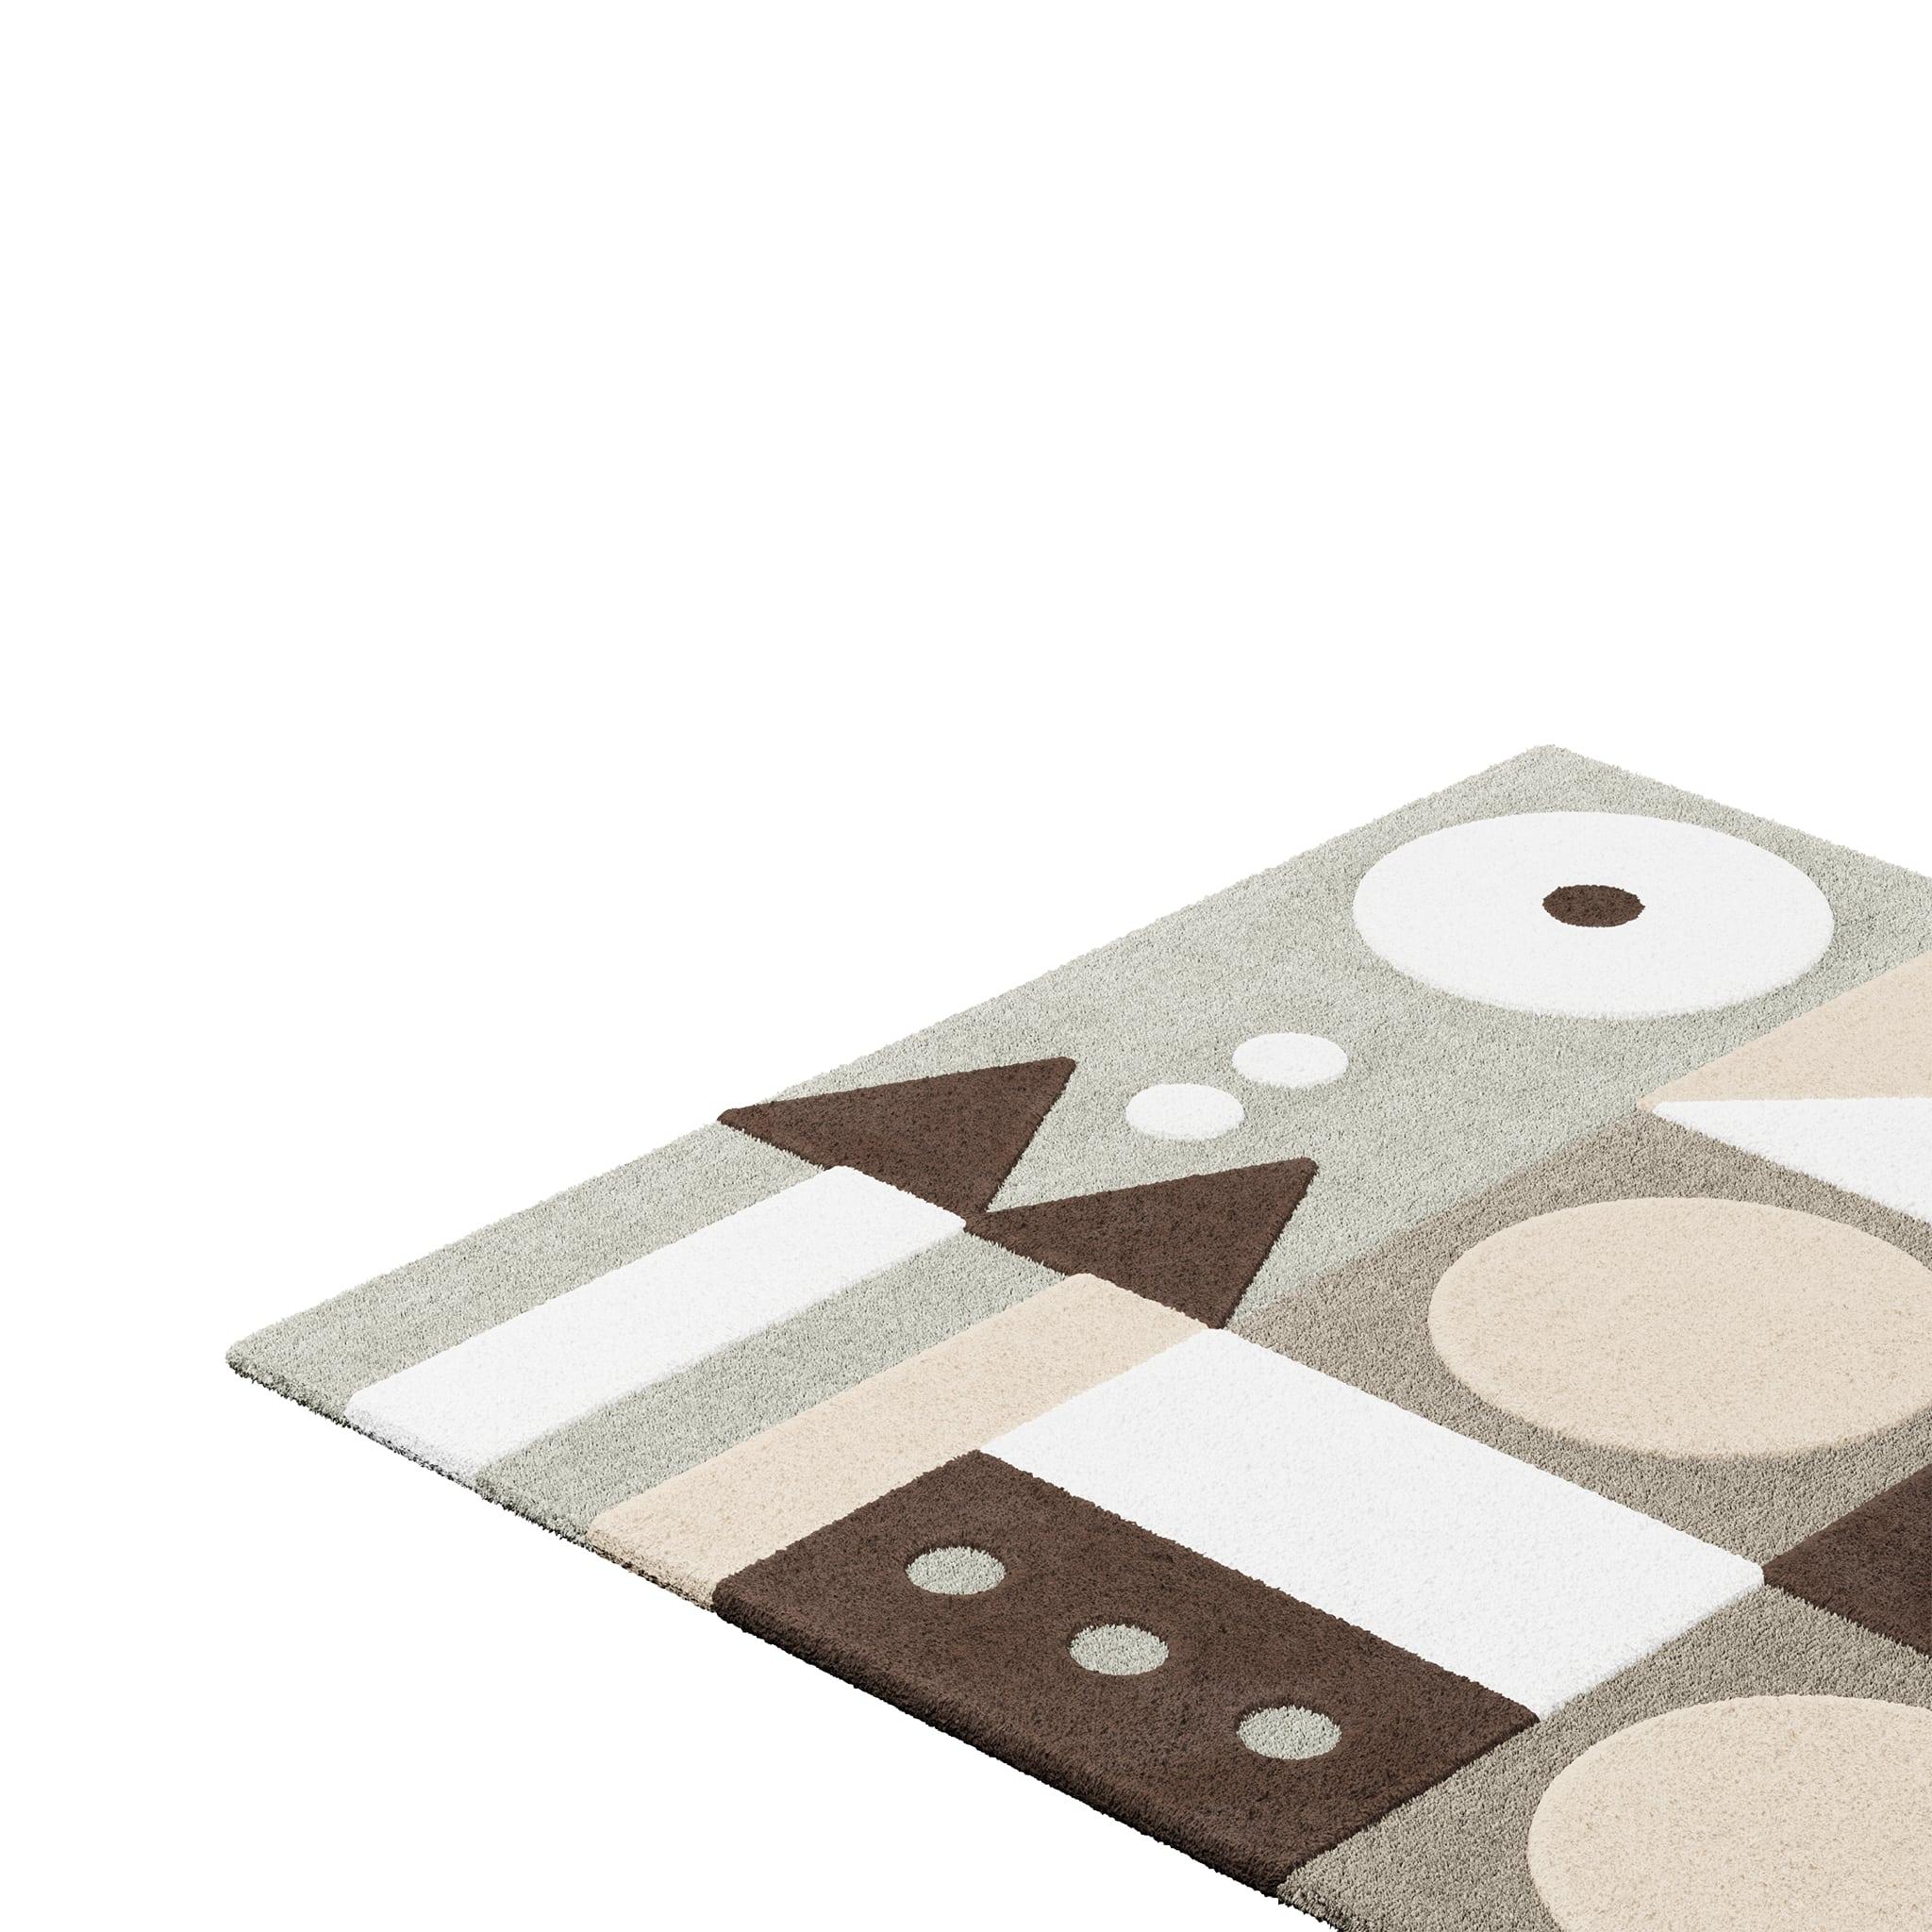 Tapis Pastel #13 is a pastel rug that mixes mid-century modern vibes with Memphis Design style. The combination of muted hues adds brightness and comfort to any room. 
This pastel area rug has a square shape and a playful pattern that creates a